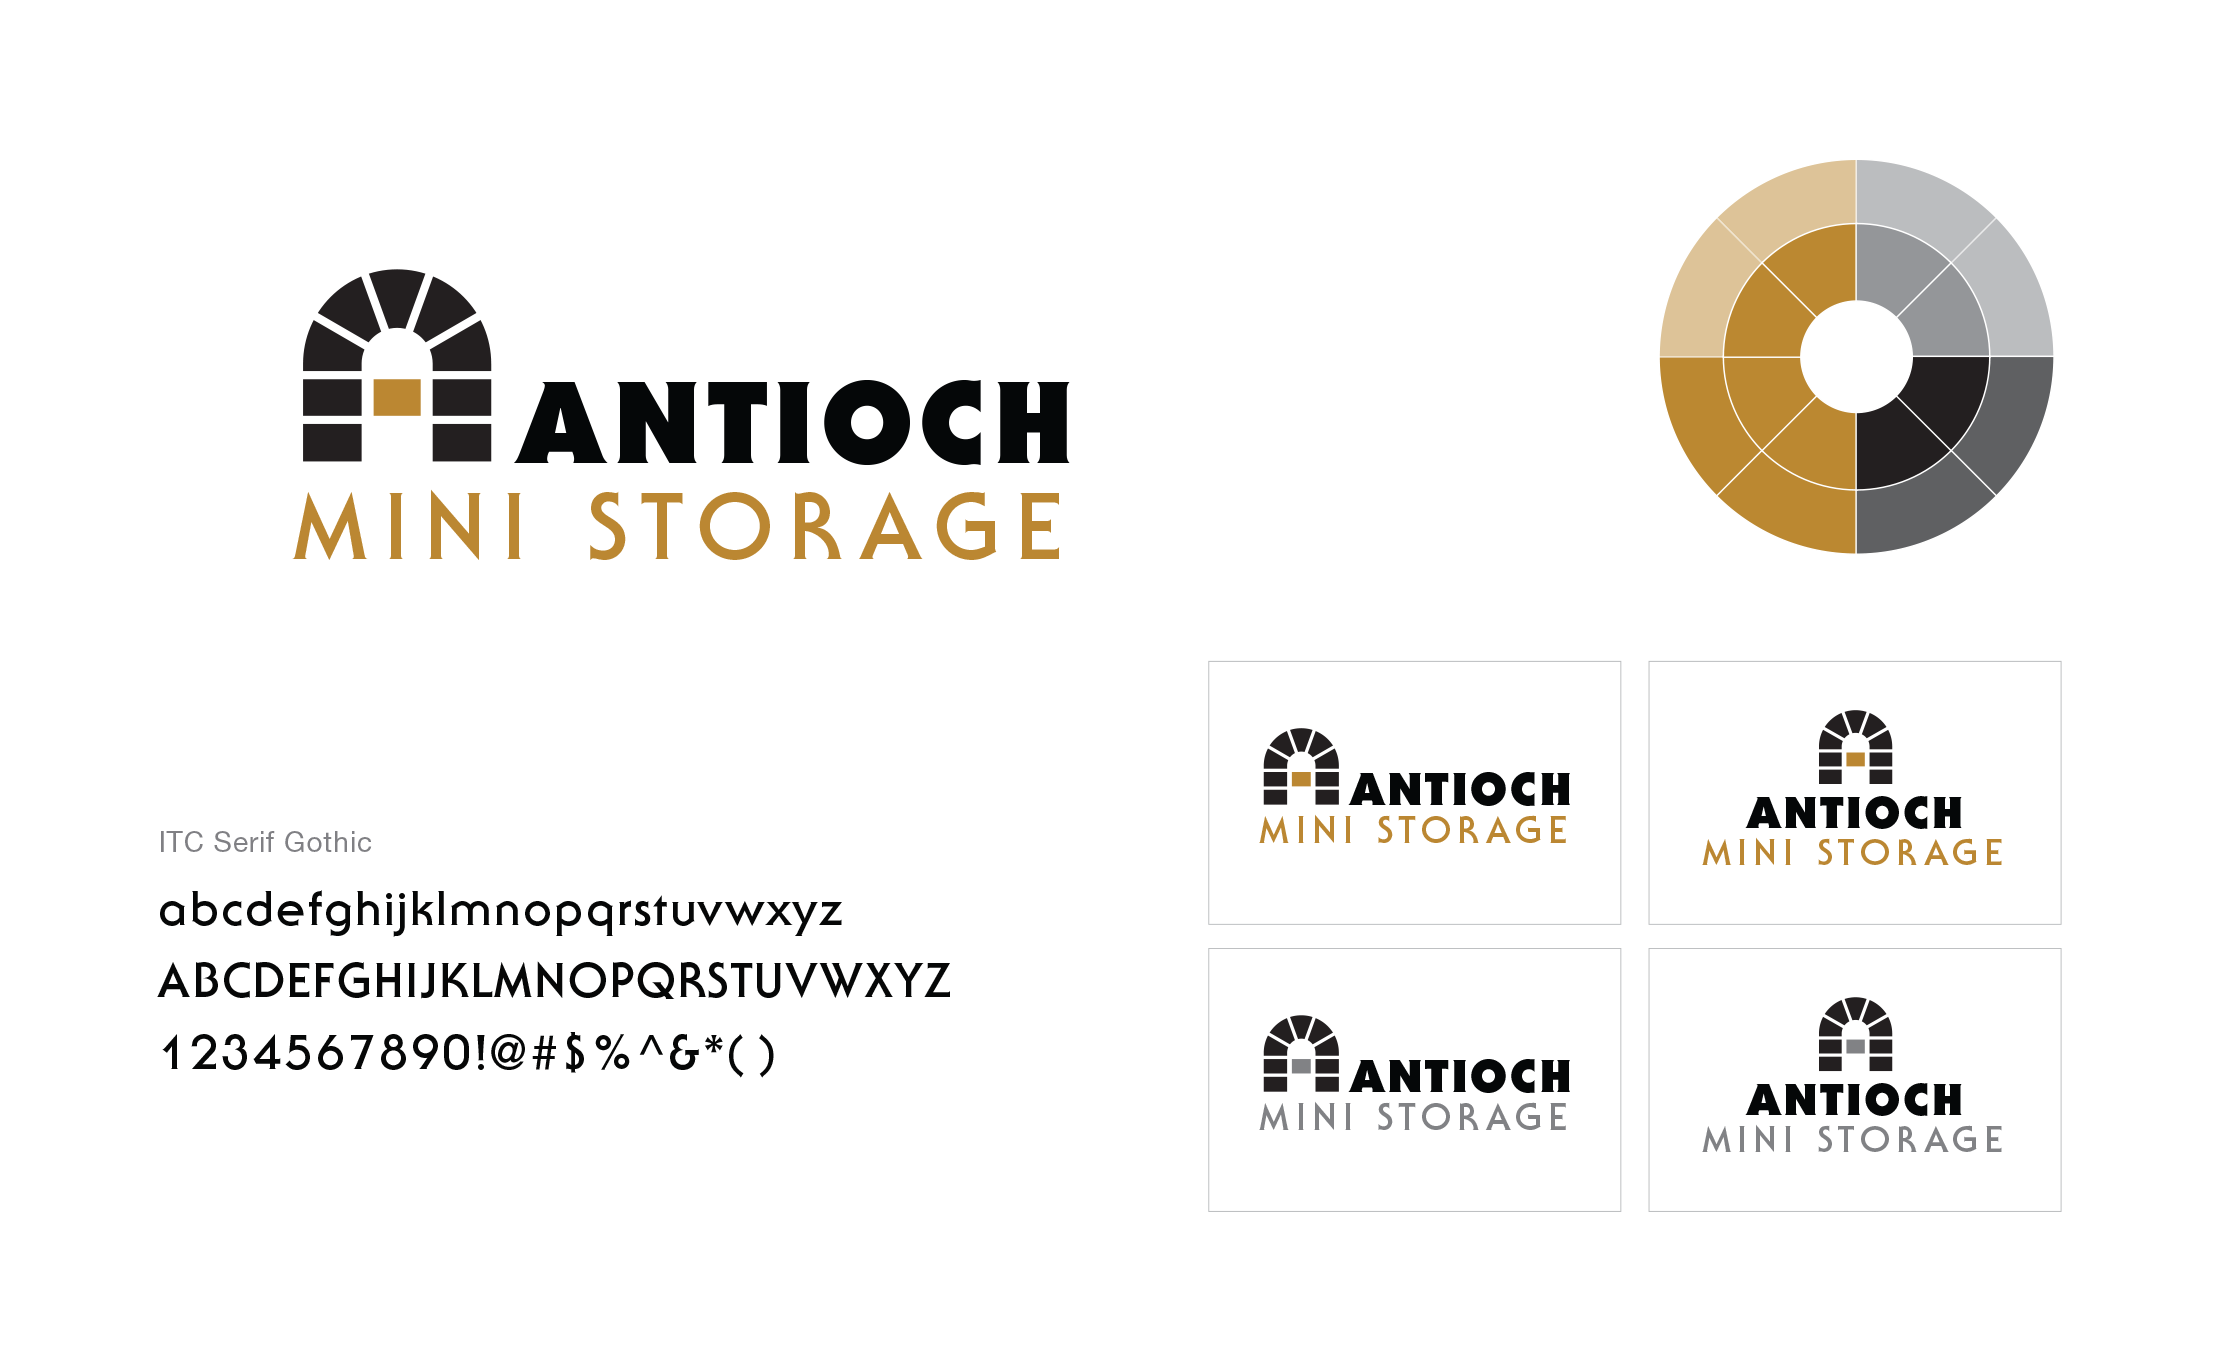 antioch_mini_storage_style-guide.png